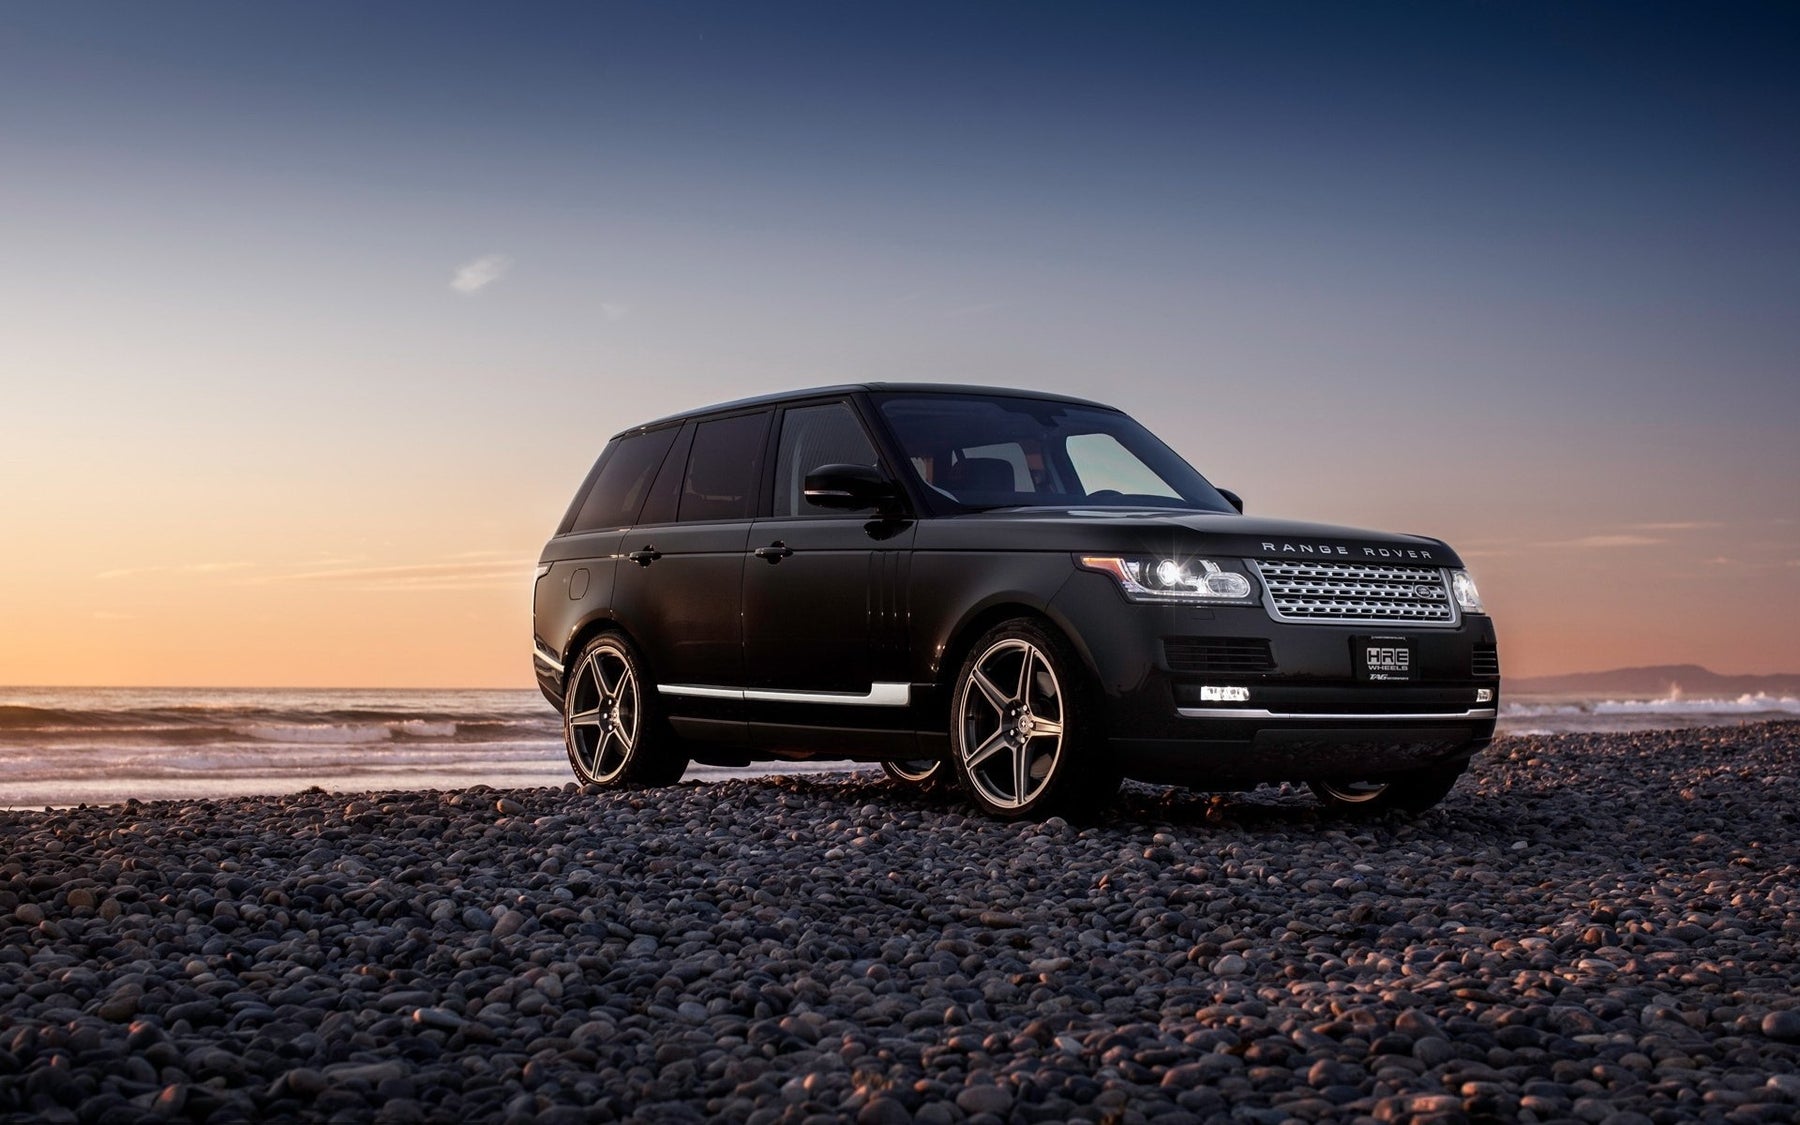 How to reset air suspension on Range Rover